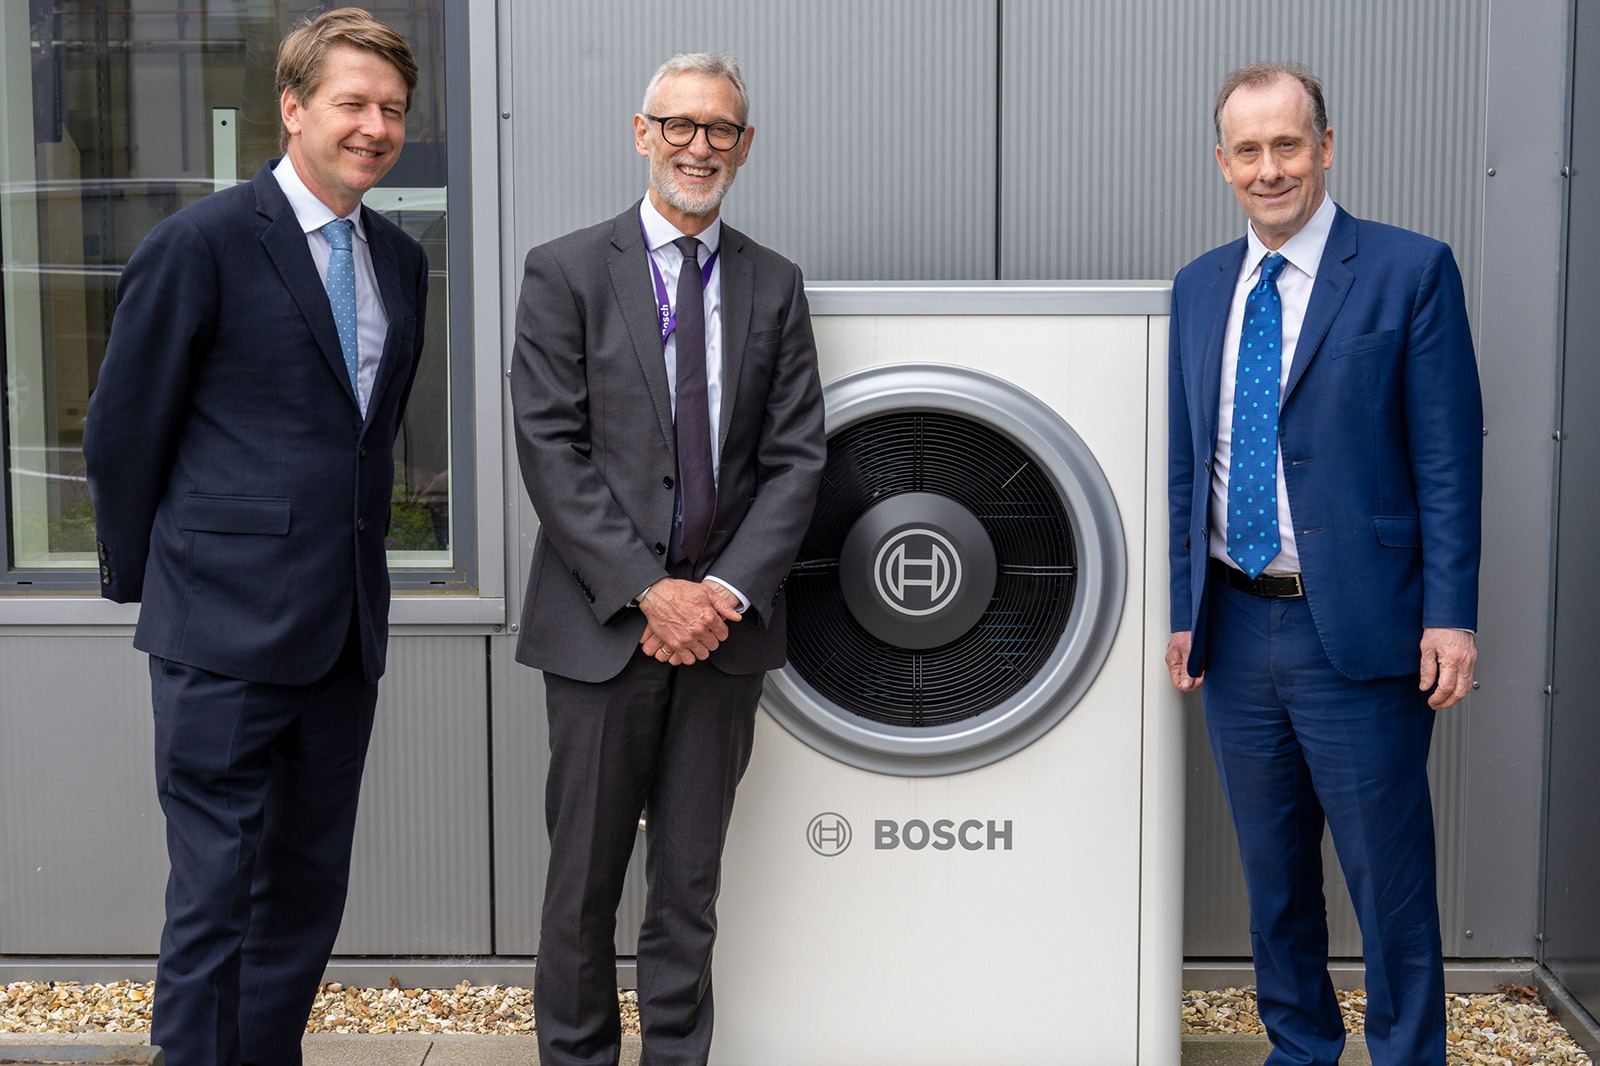 Worcester Bosch showcases low-carbon heat developments during ministerial visit